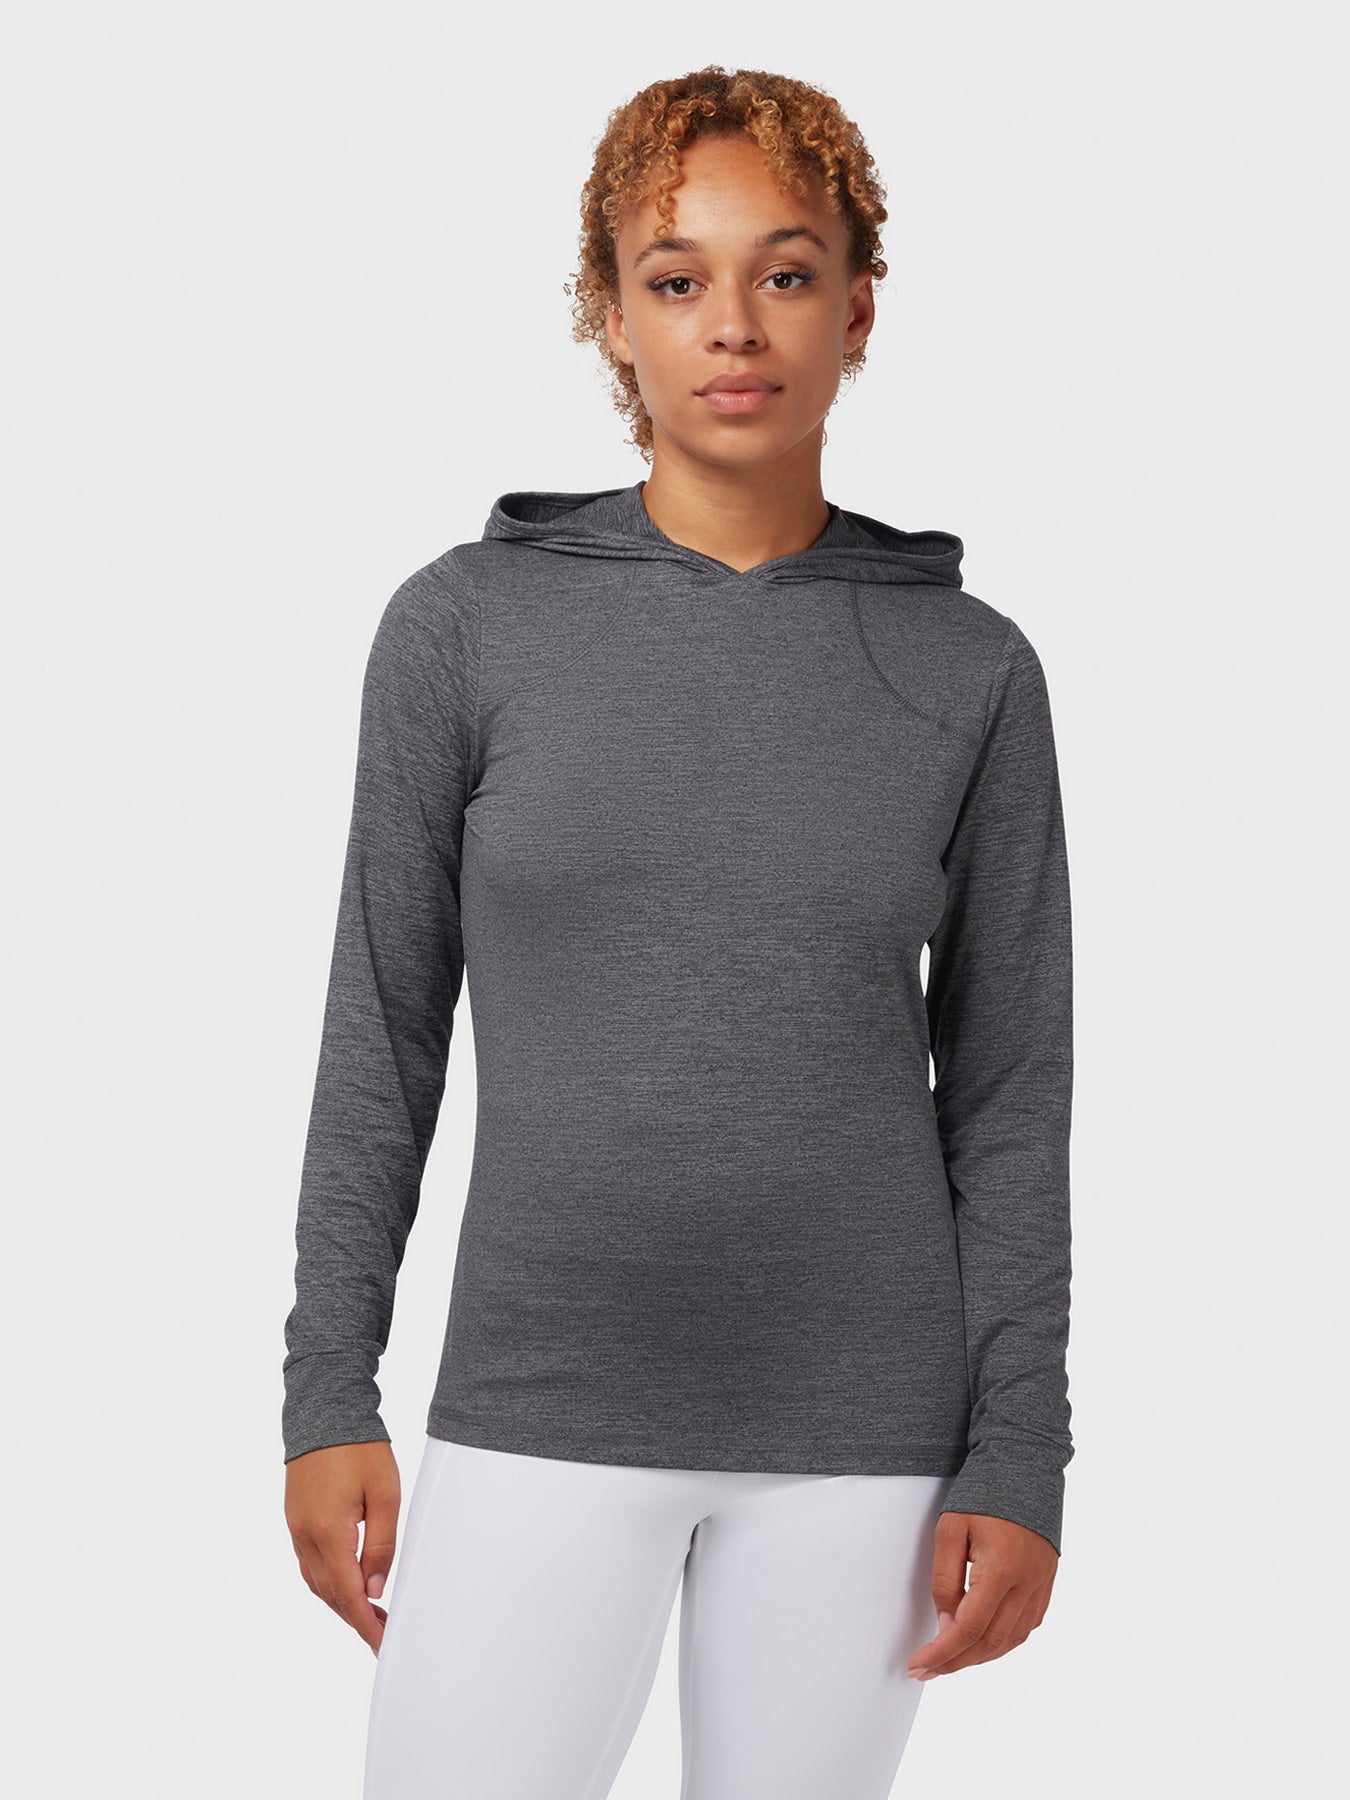 View Brushed Heather Womens Hoodie In Black Heather Black Heather L information